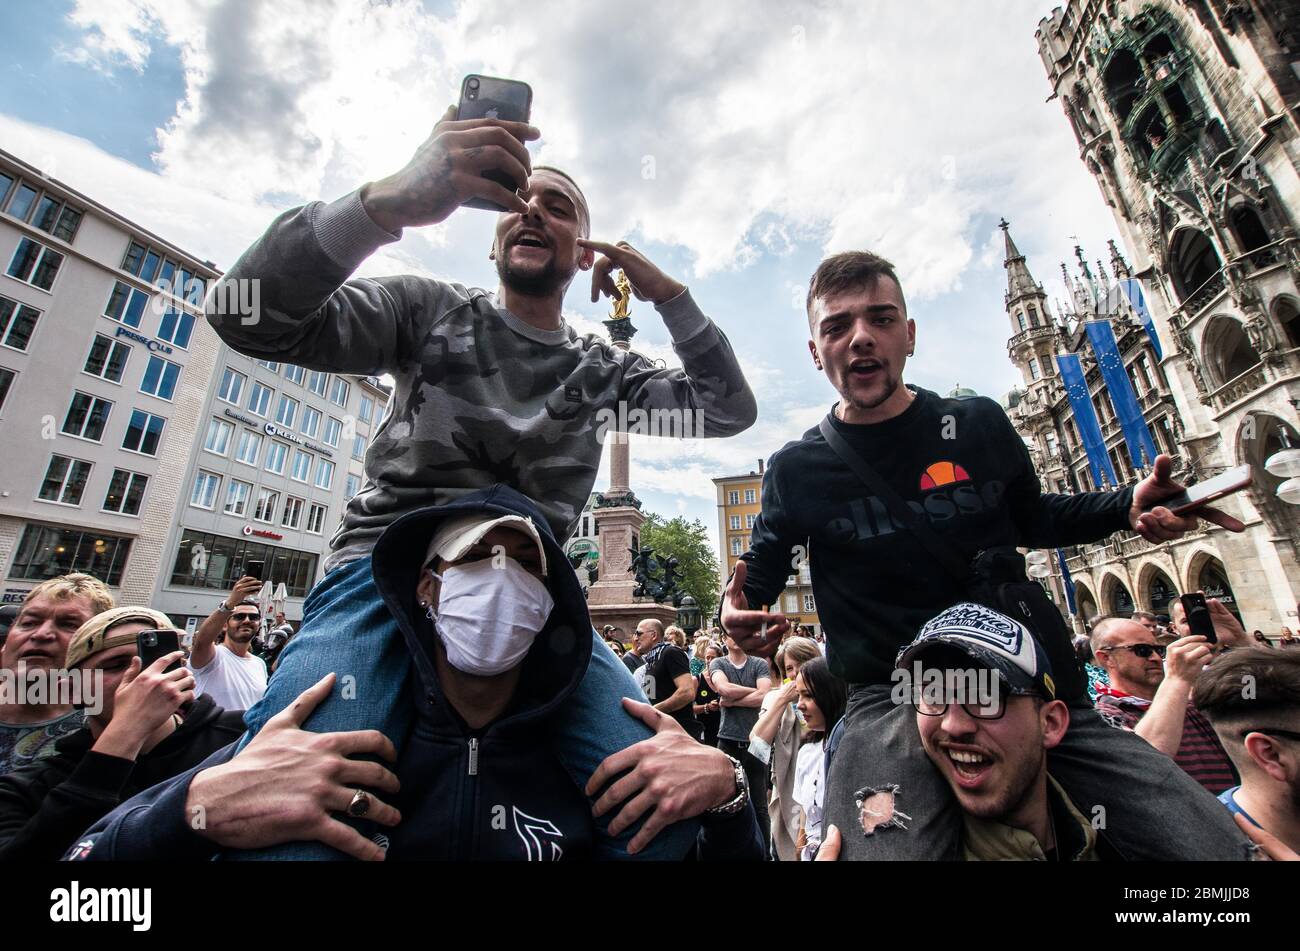 Munich, Bavaria, Germany. 9th May, 2020. Demonstrators who were part of a hooligan block were trying to incite a conflict or riot against police began changing ''wir sind das Volk'' and ''Widerstand'', as well as approaching police intimidatingly. Despite ongoing relaxing measures, a 'Querfront'' (cross-front) mixture of 3,000 conspiracy theorists, QAnon followers, right-extremists, AfD figures, neonazis, hooligans, and Widerstand2020 assembled for a third weekend in Munich's city center, primarily at Marienplatz, to demonstrate for restoration of the Grundgesetz amid the Coronavirus crisis Stock Photo